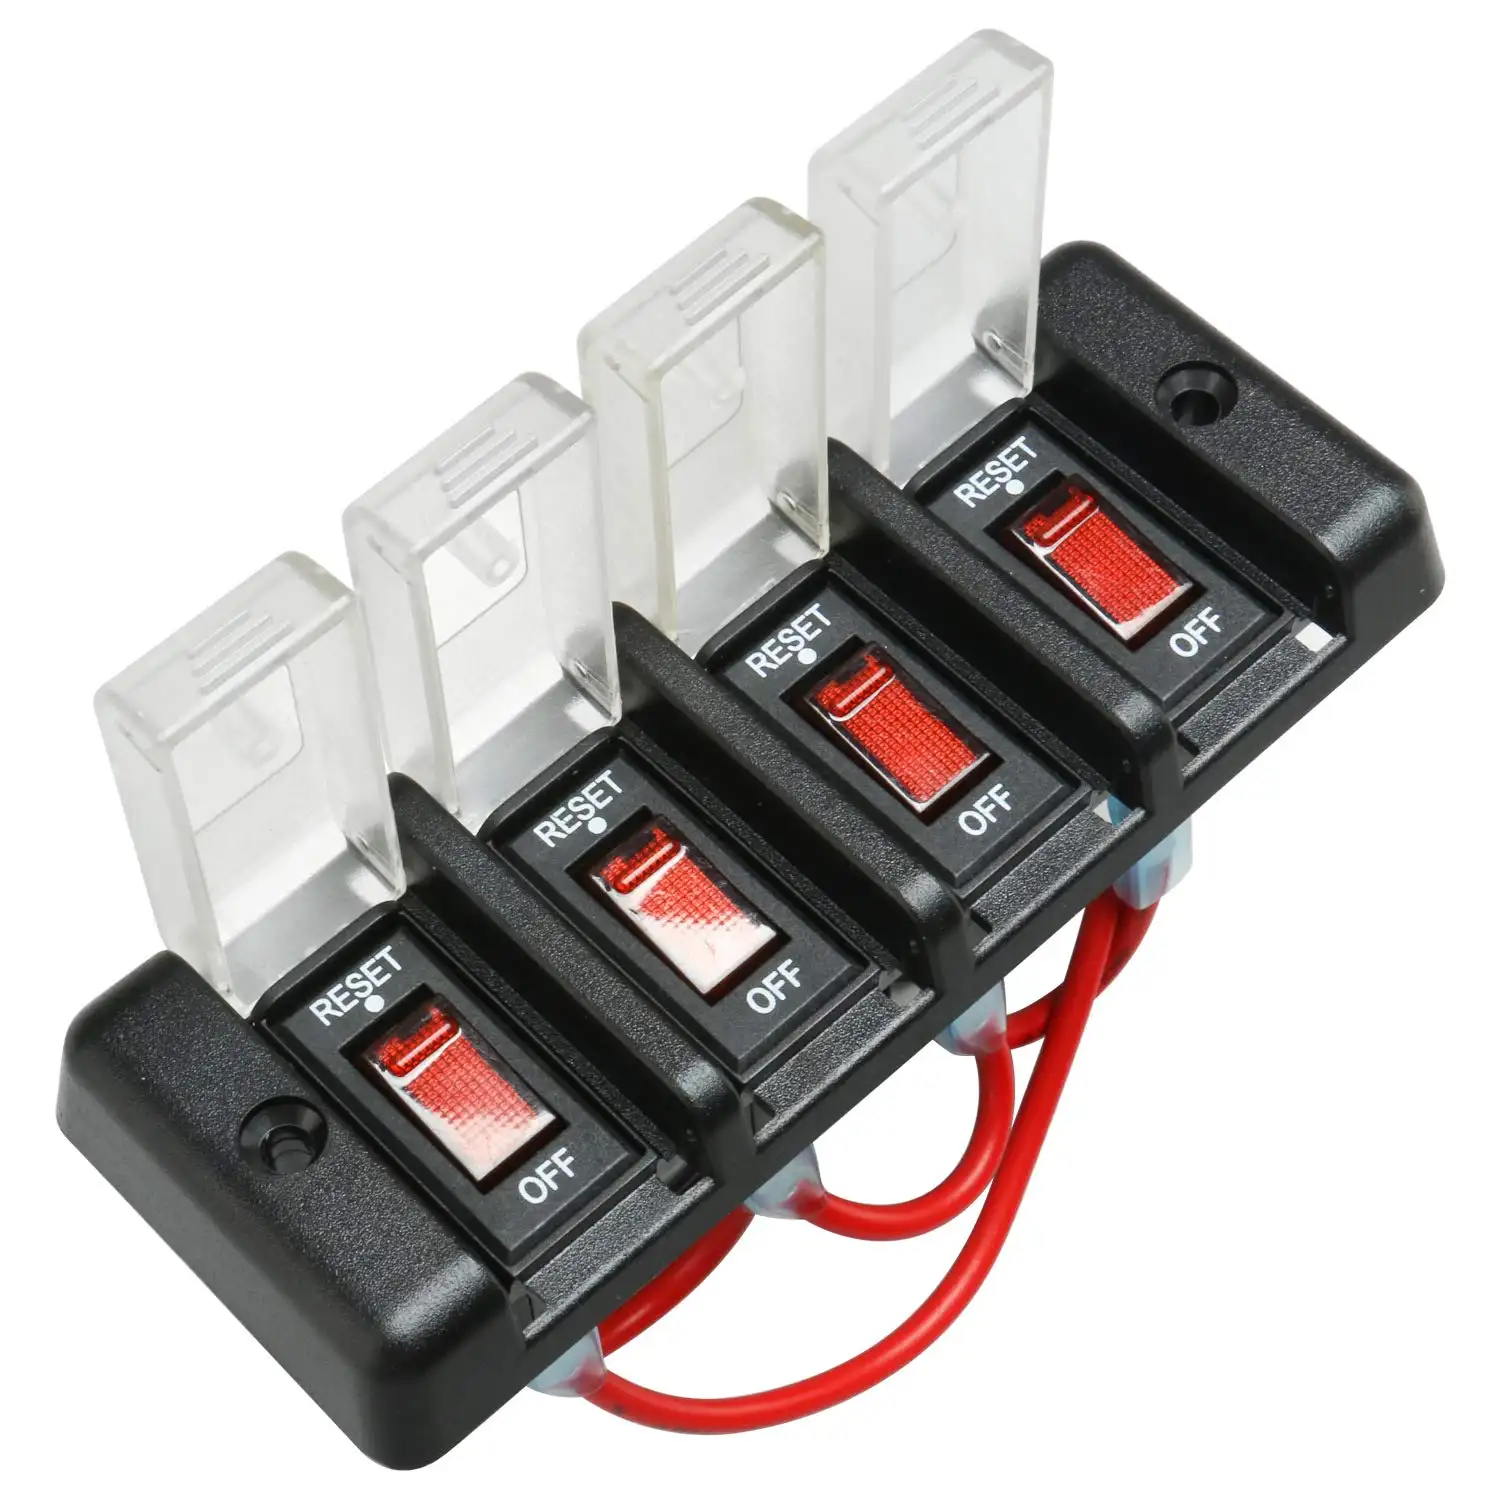 Auto Car Accessories DC 12V 4 Way Button Rocker Toggle Switch Panel 16A Circuit Breakers with Red LED Indicator